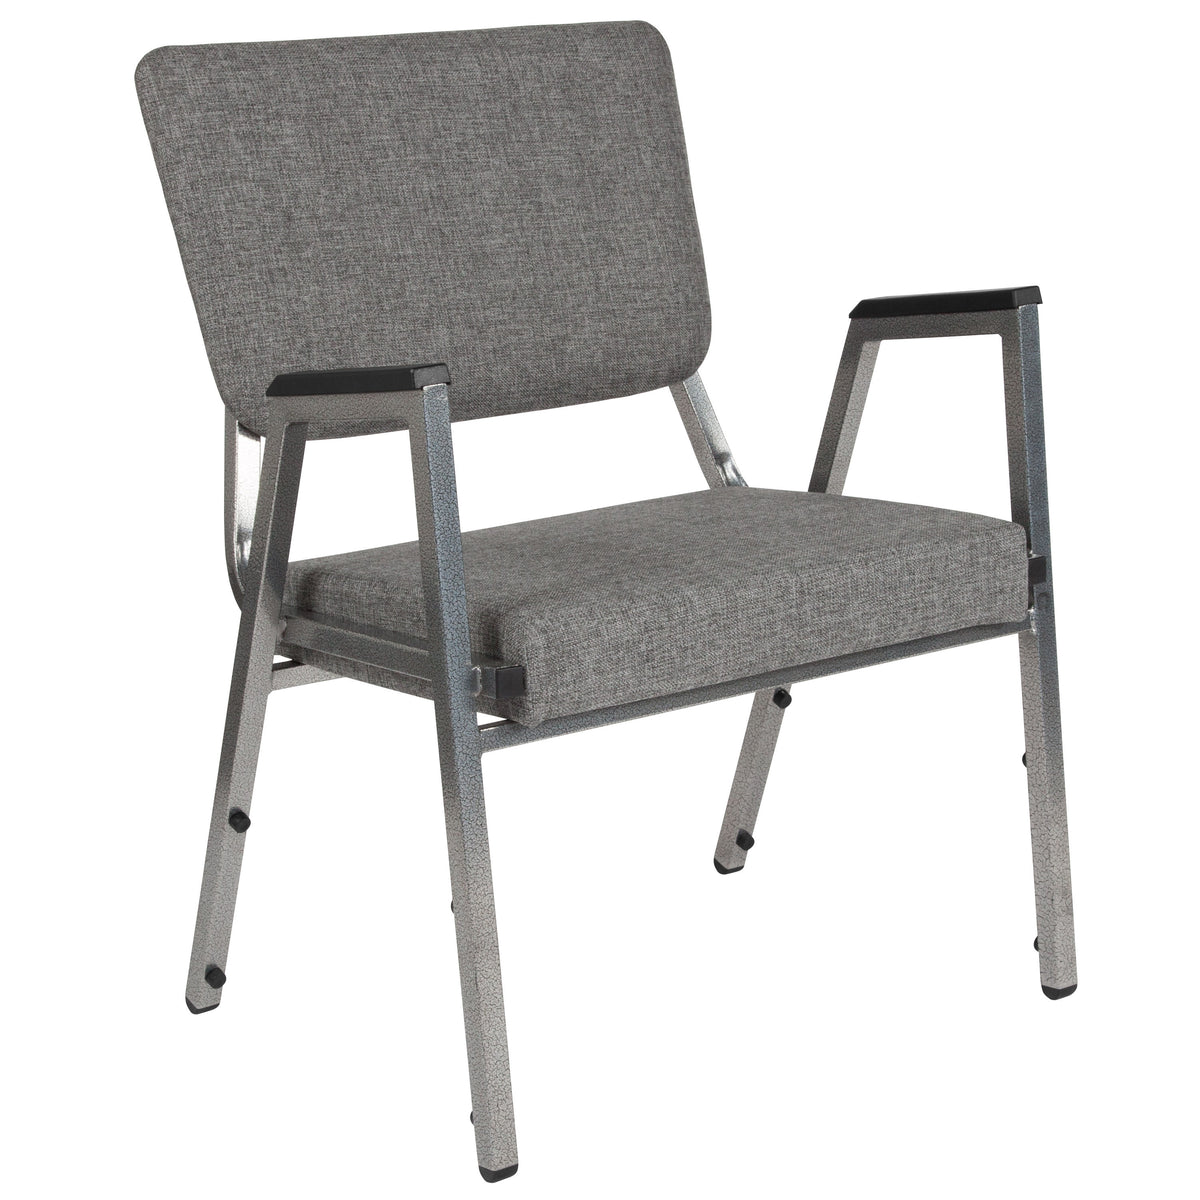 Gray Fabric |#| 1000 lb. Rated Gray Antimicrobial Fabric Bariatric Medical Reception Arm Chair